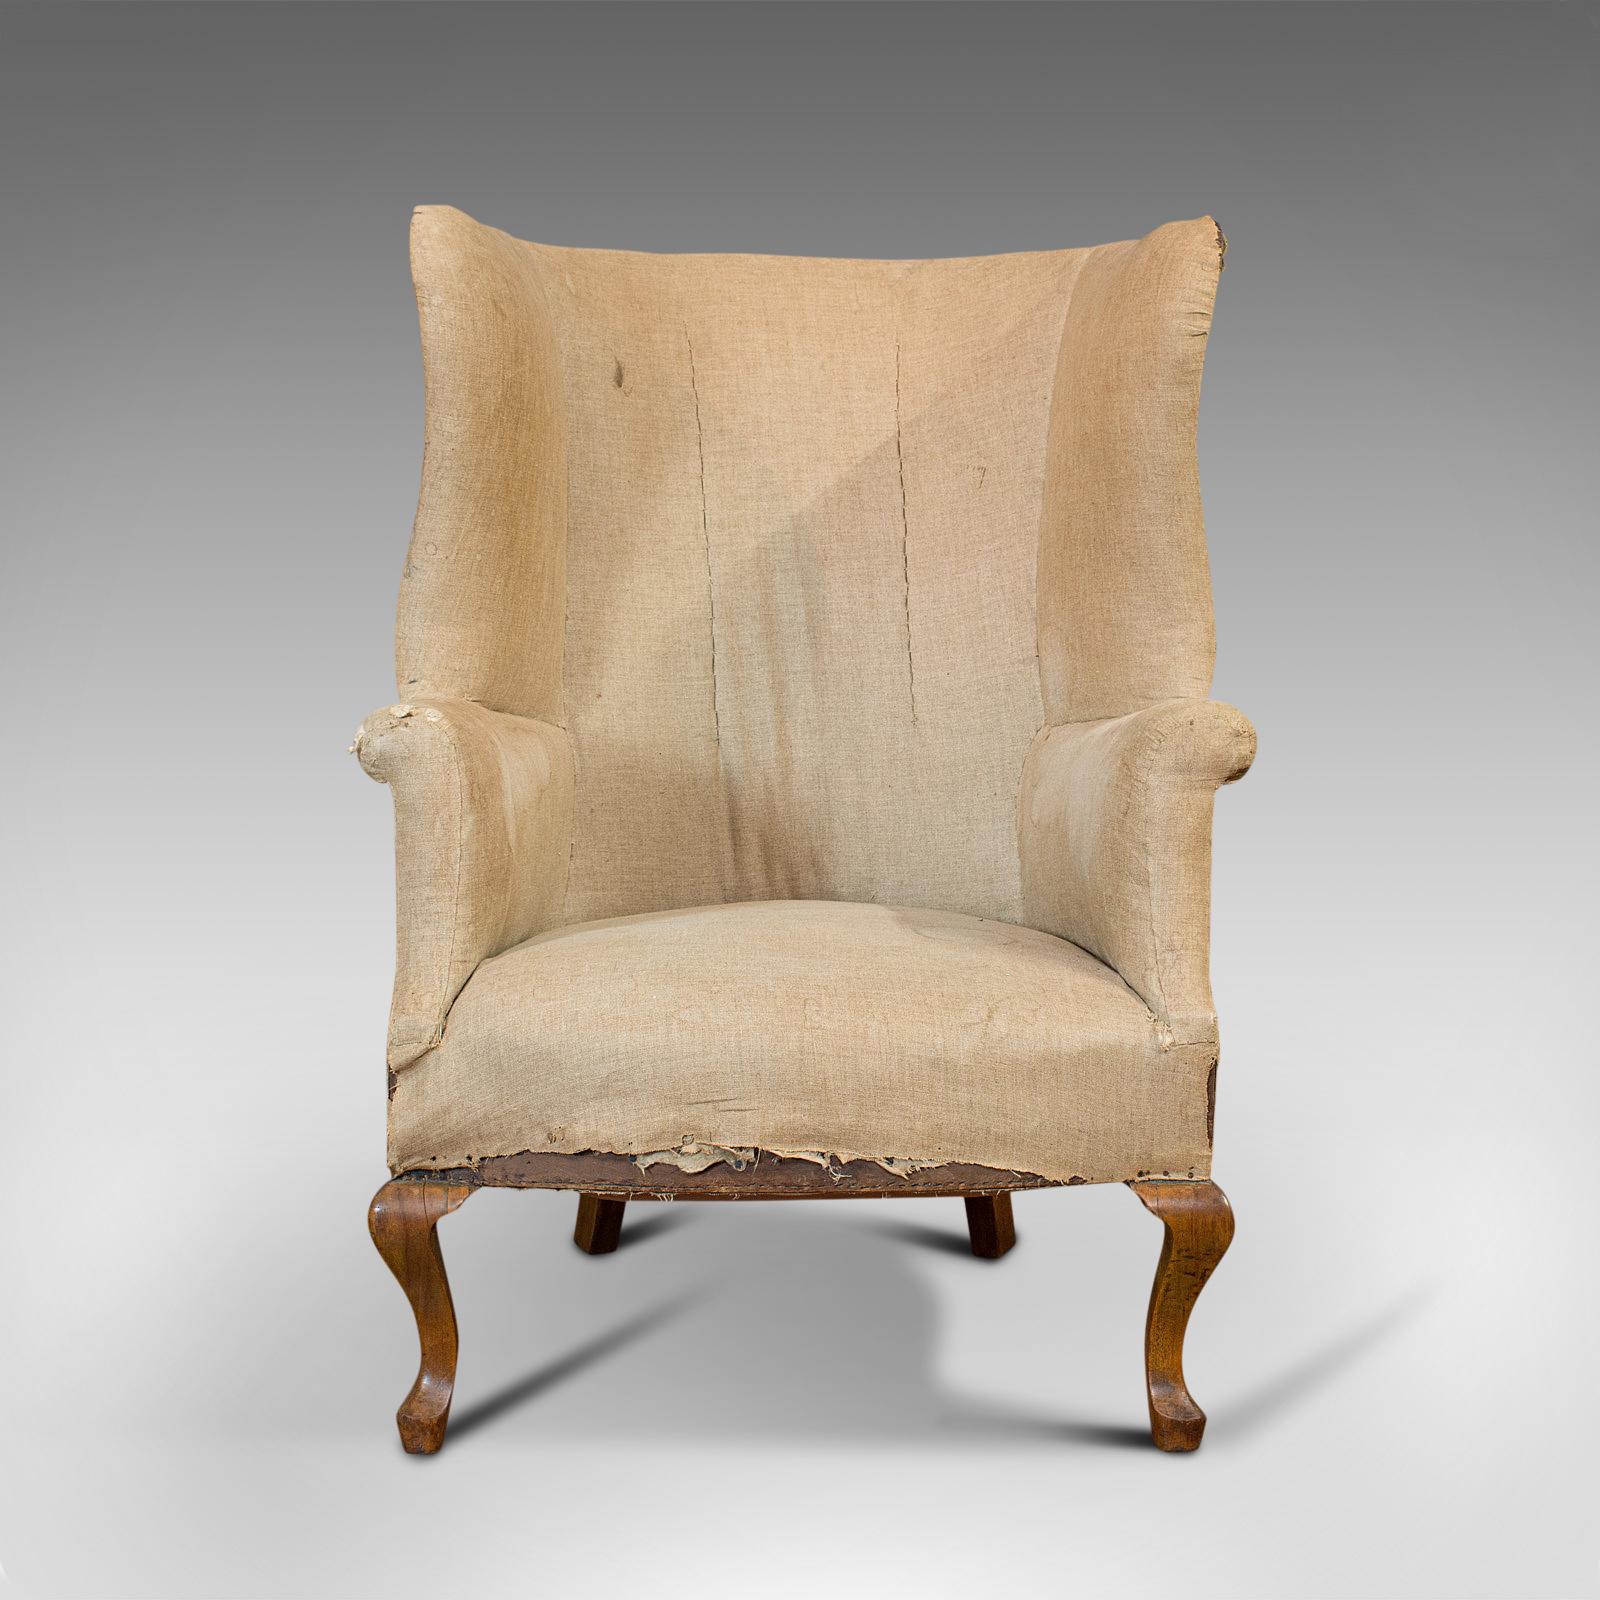 This is an antique wing armchair. An English, barrel-back seat, dating to the late Victorian period, circa 1900.

Presented ready for its final reupholstering
Displaying a wonderfully patinated appearance
Striking barrel-back with high wing